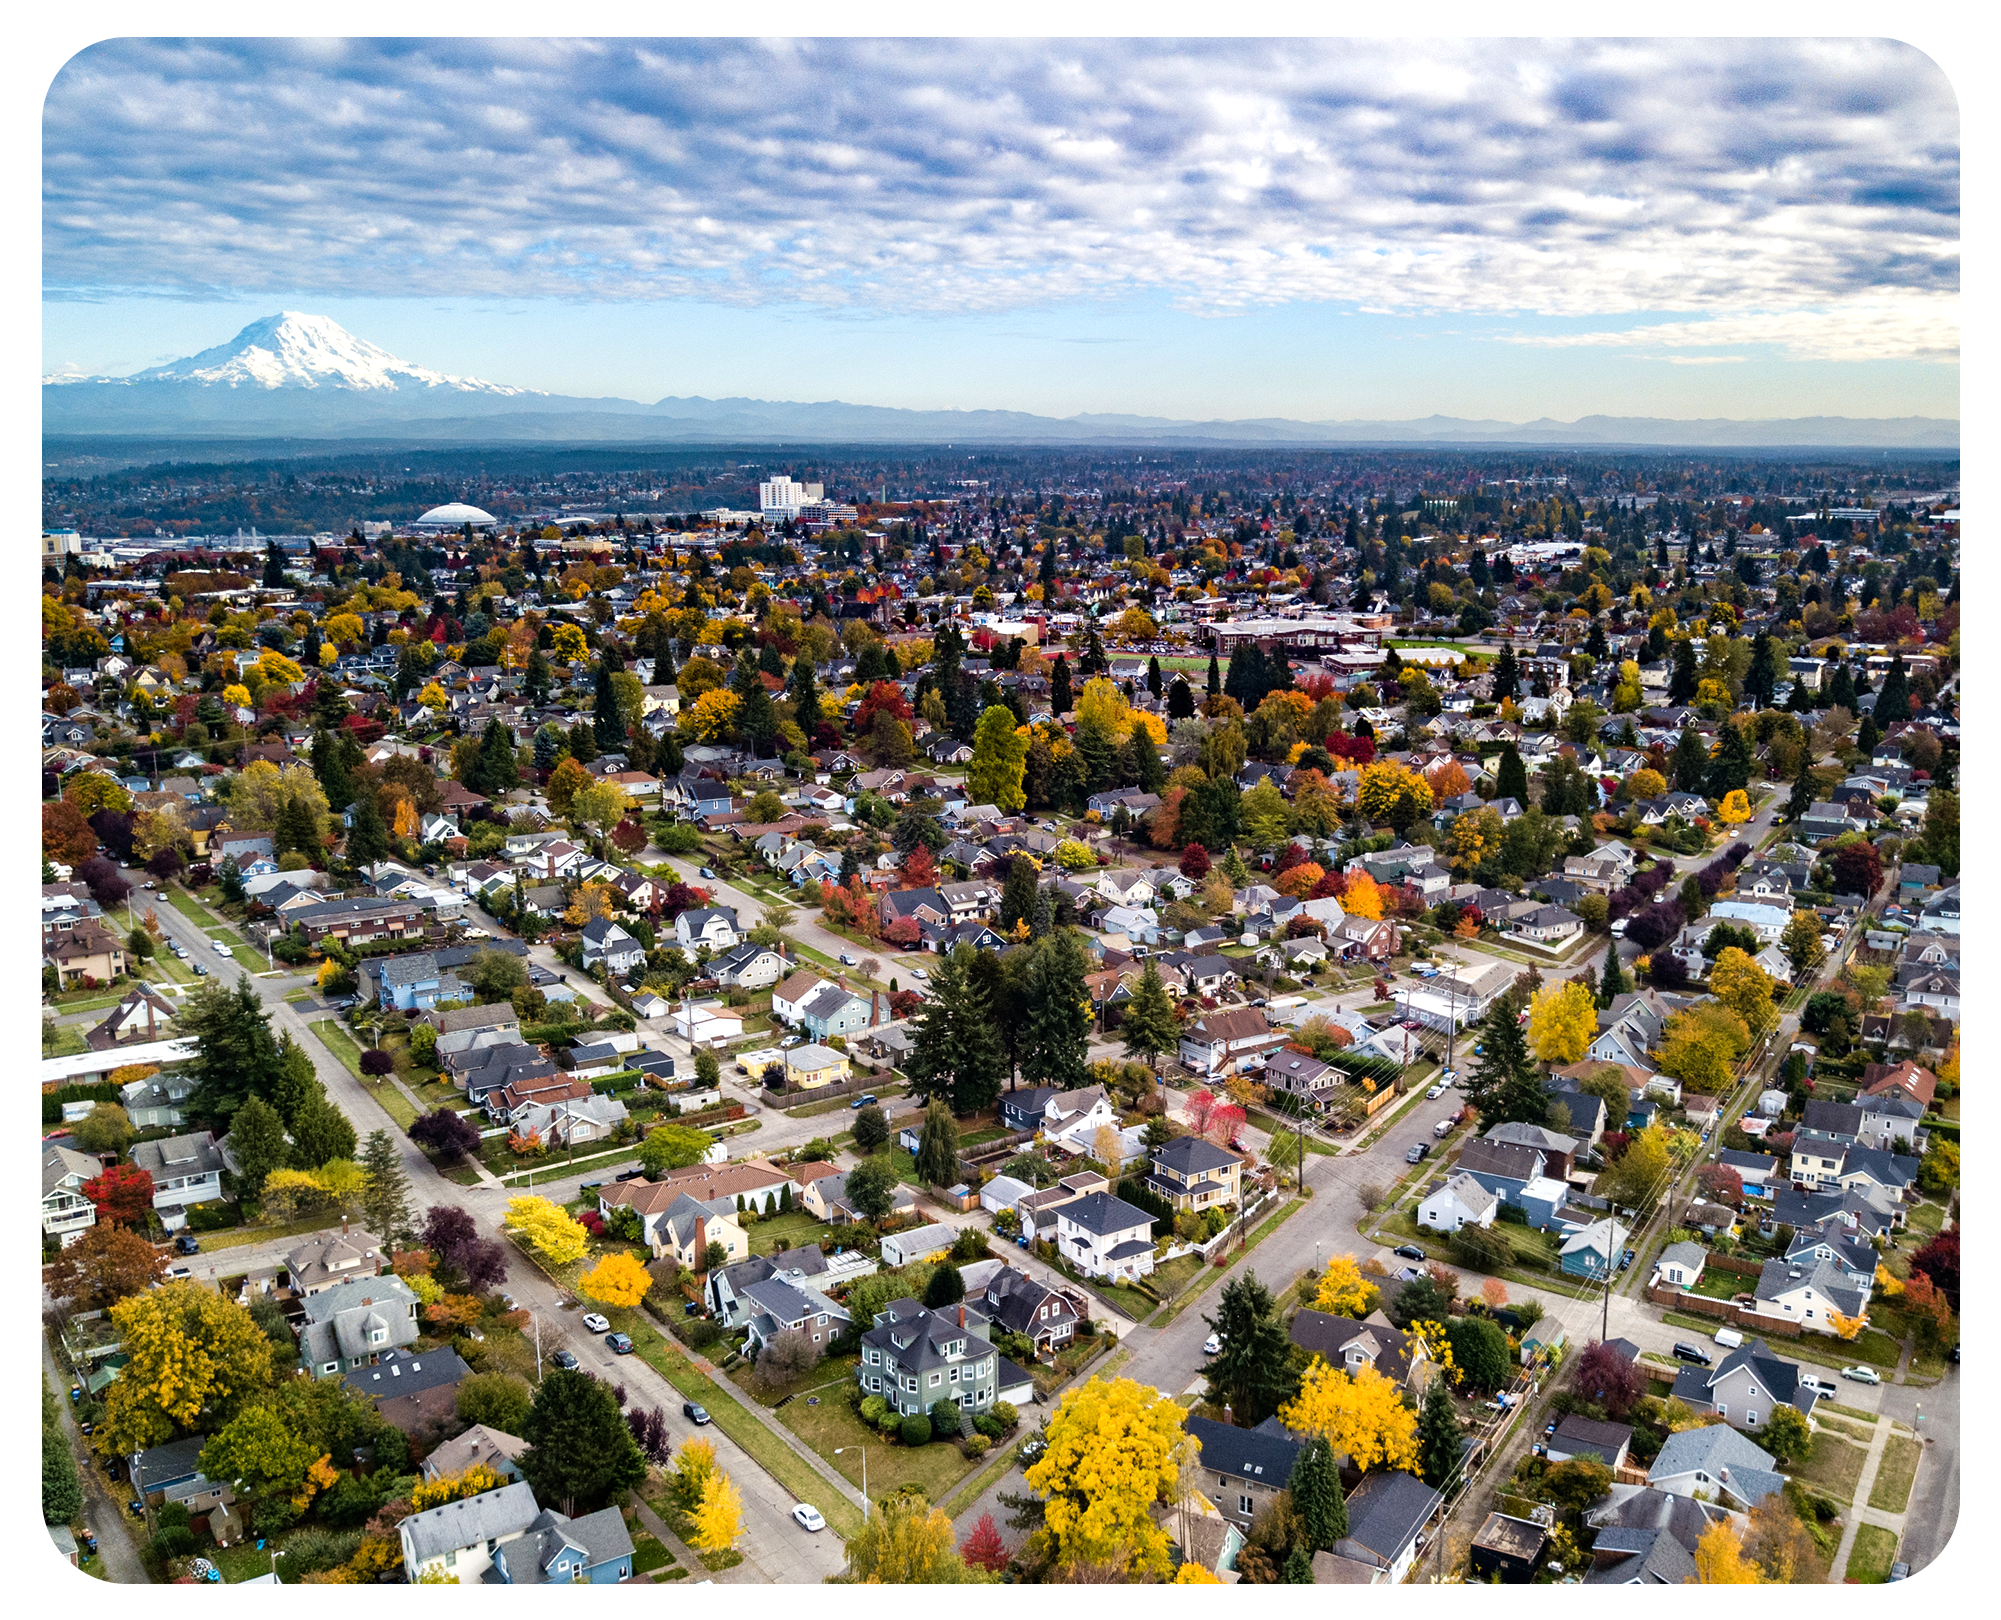 An aerial view of a neighborhood in Washington state, with Mount Rainier in the distance and a cloudy sky